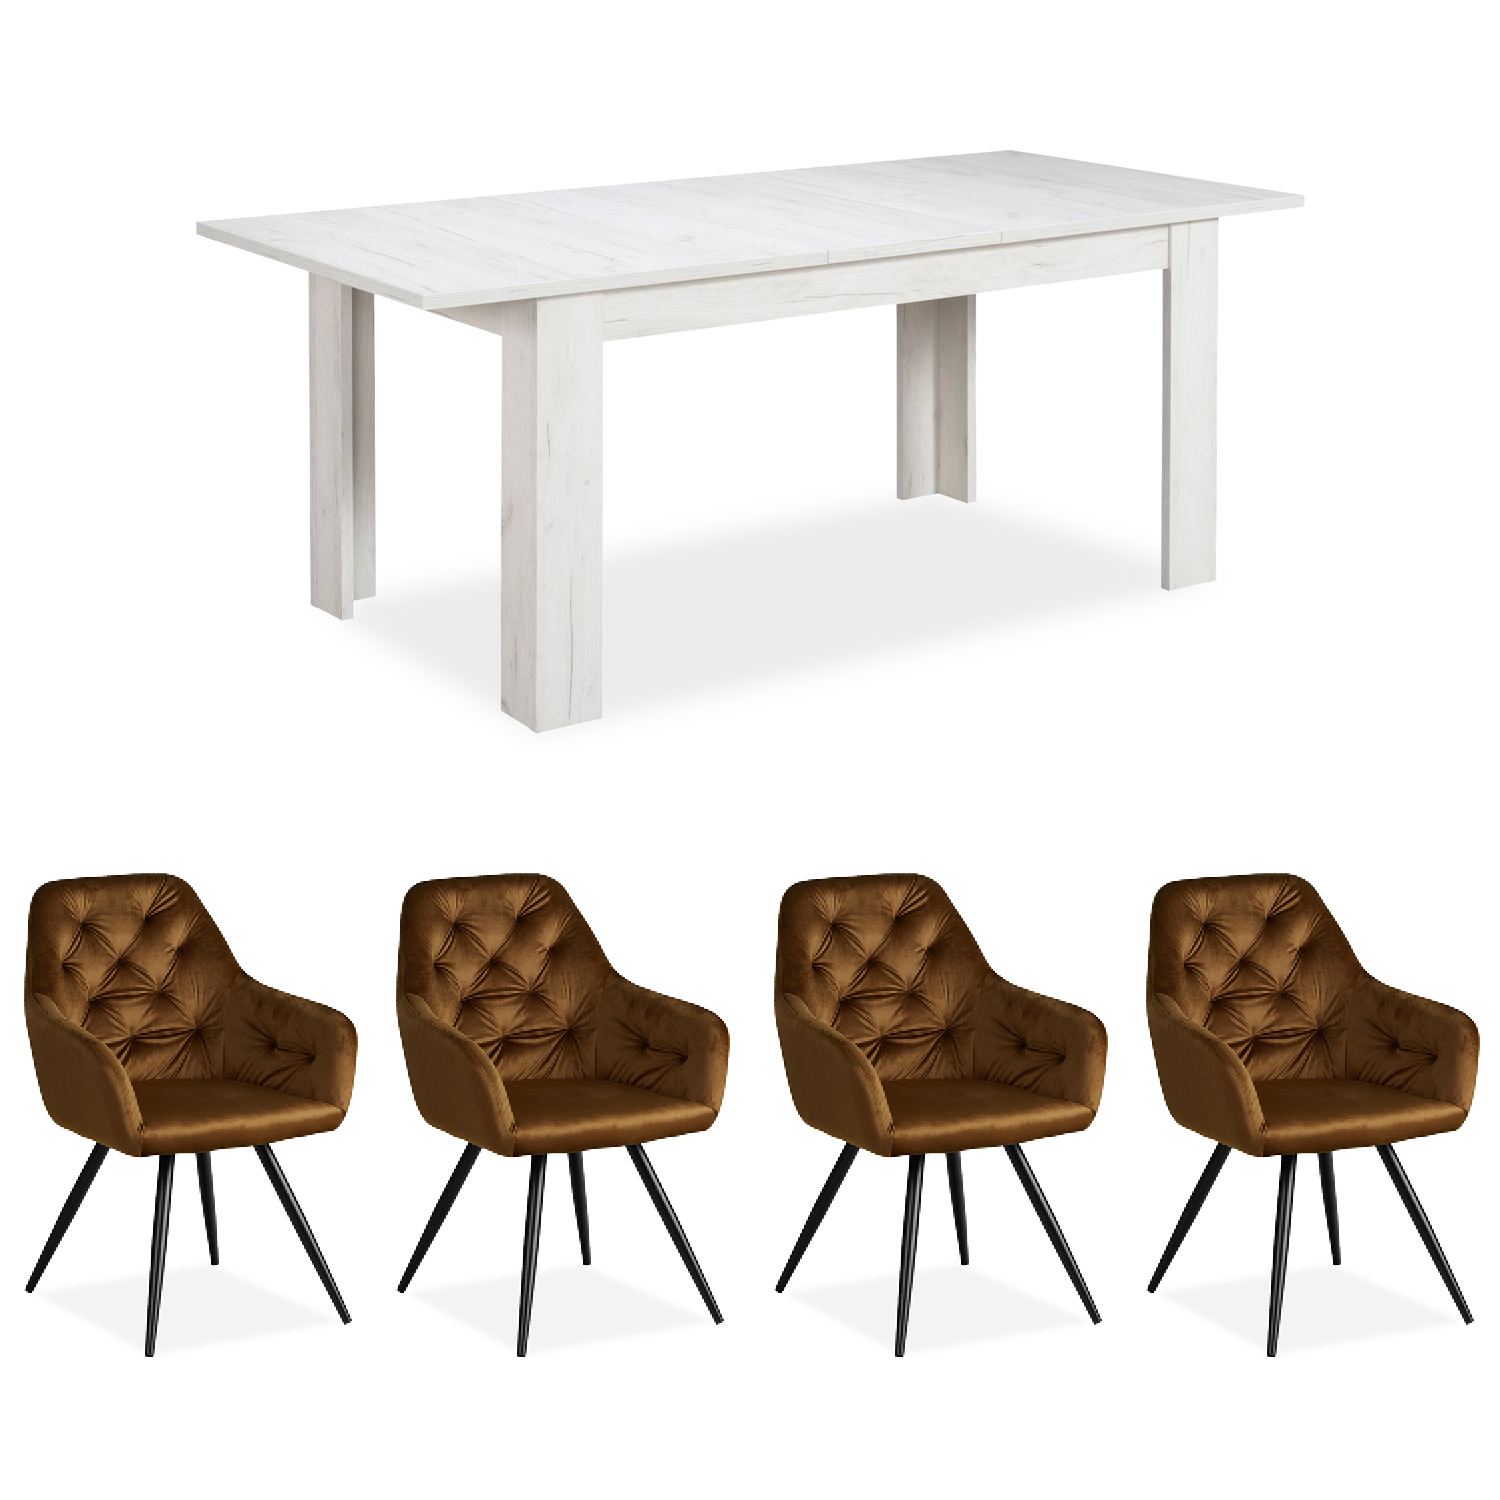 Dining Table 160x90 cm Extendable with 4 Chairs Brown Velvet Dining Room Table Wooden Table White